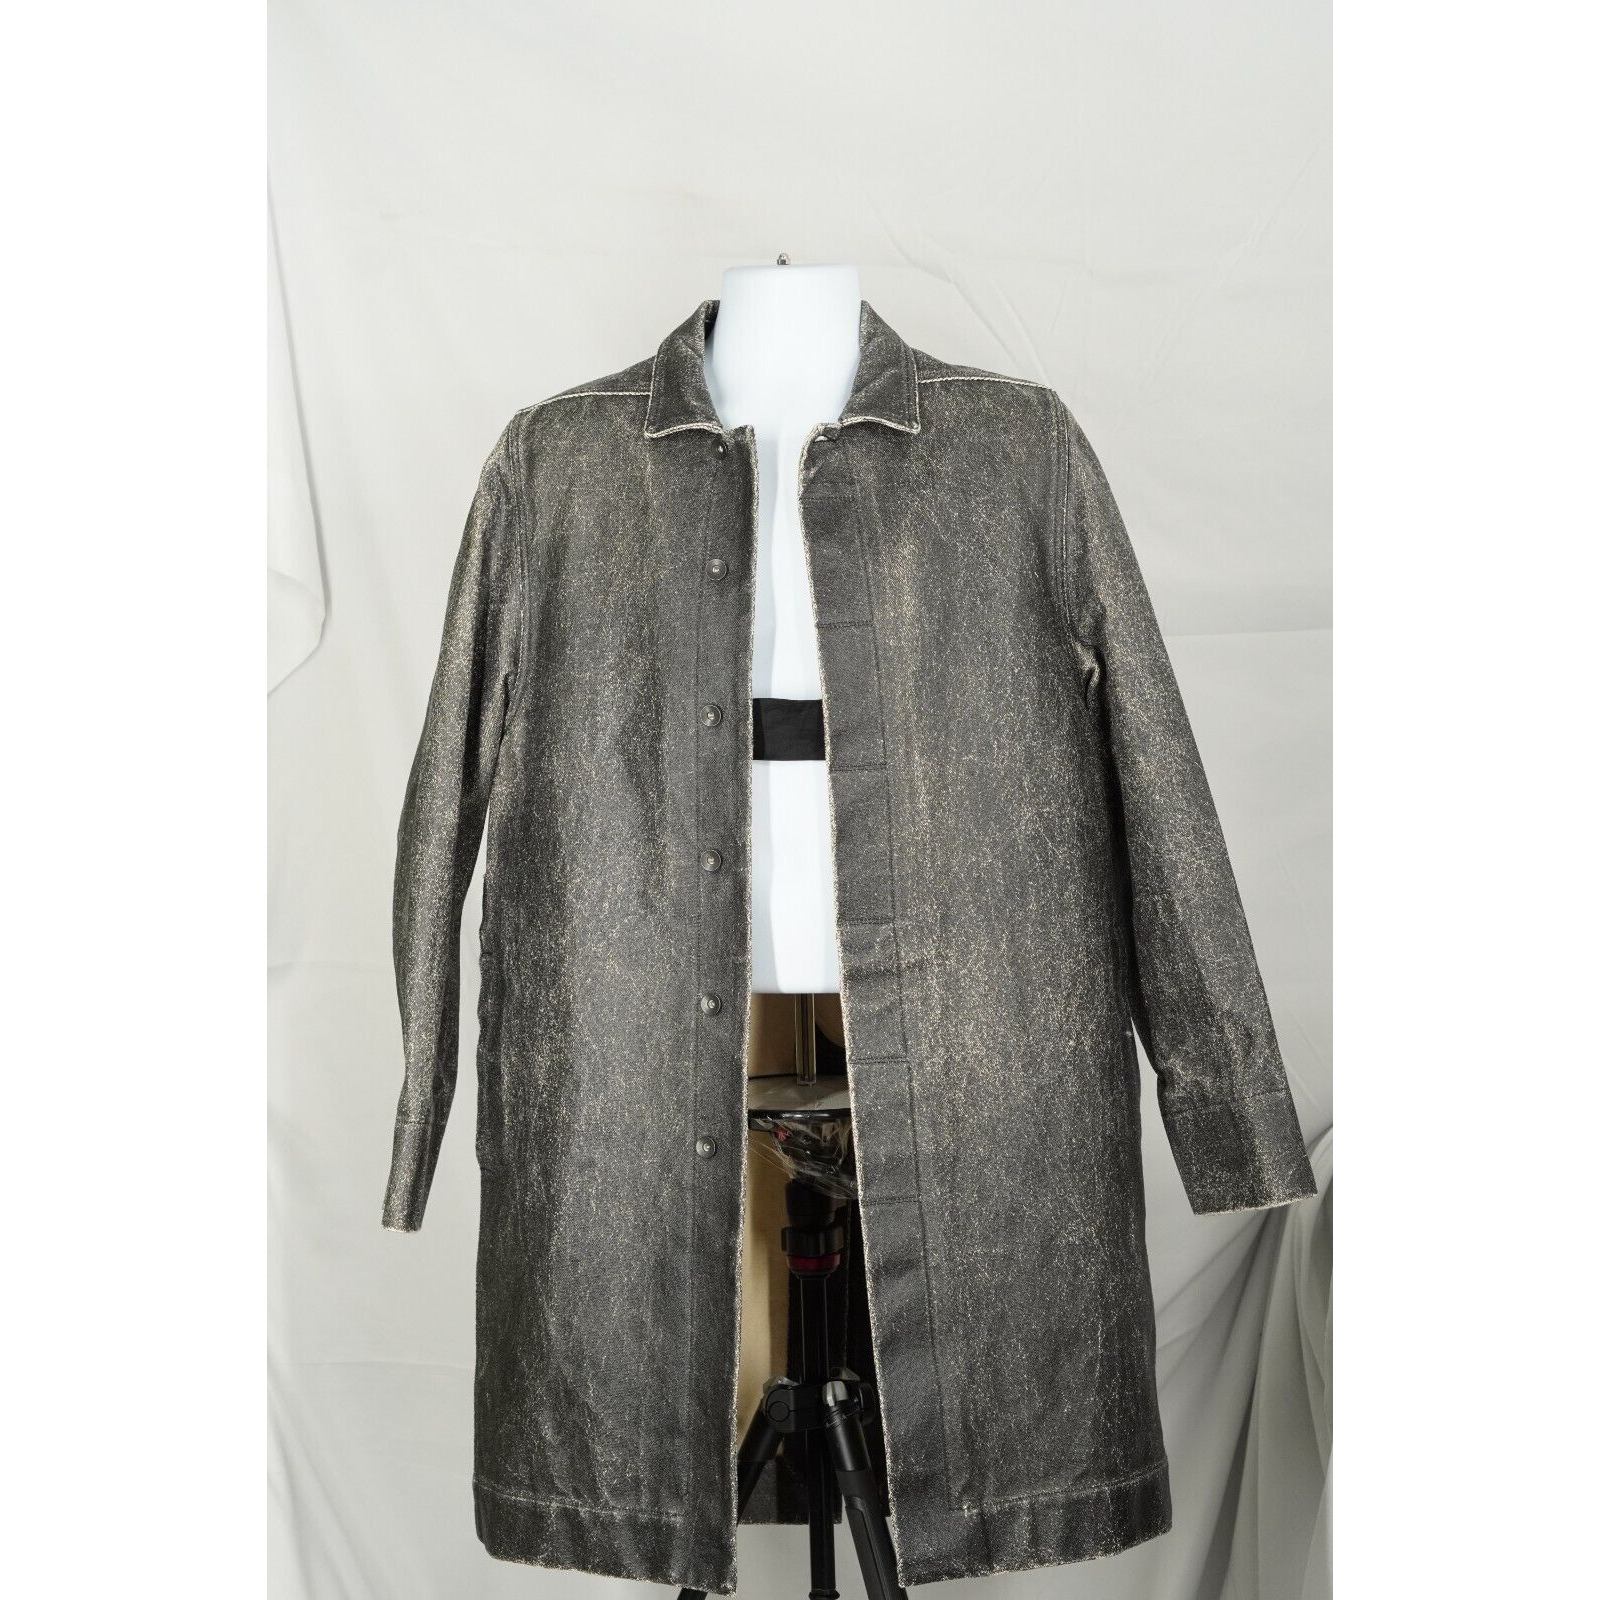 Rick Owens Canvas Trench Coat Waxed / Cracked DRKSHDW - Smal - 1